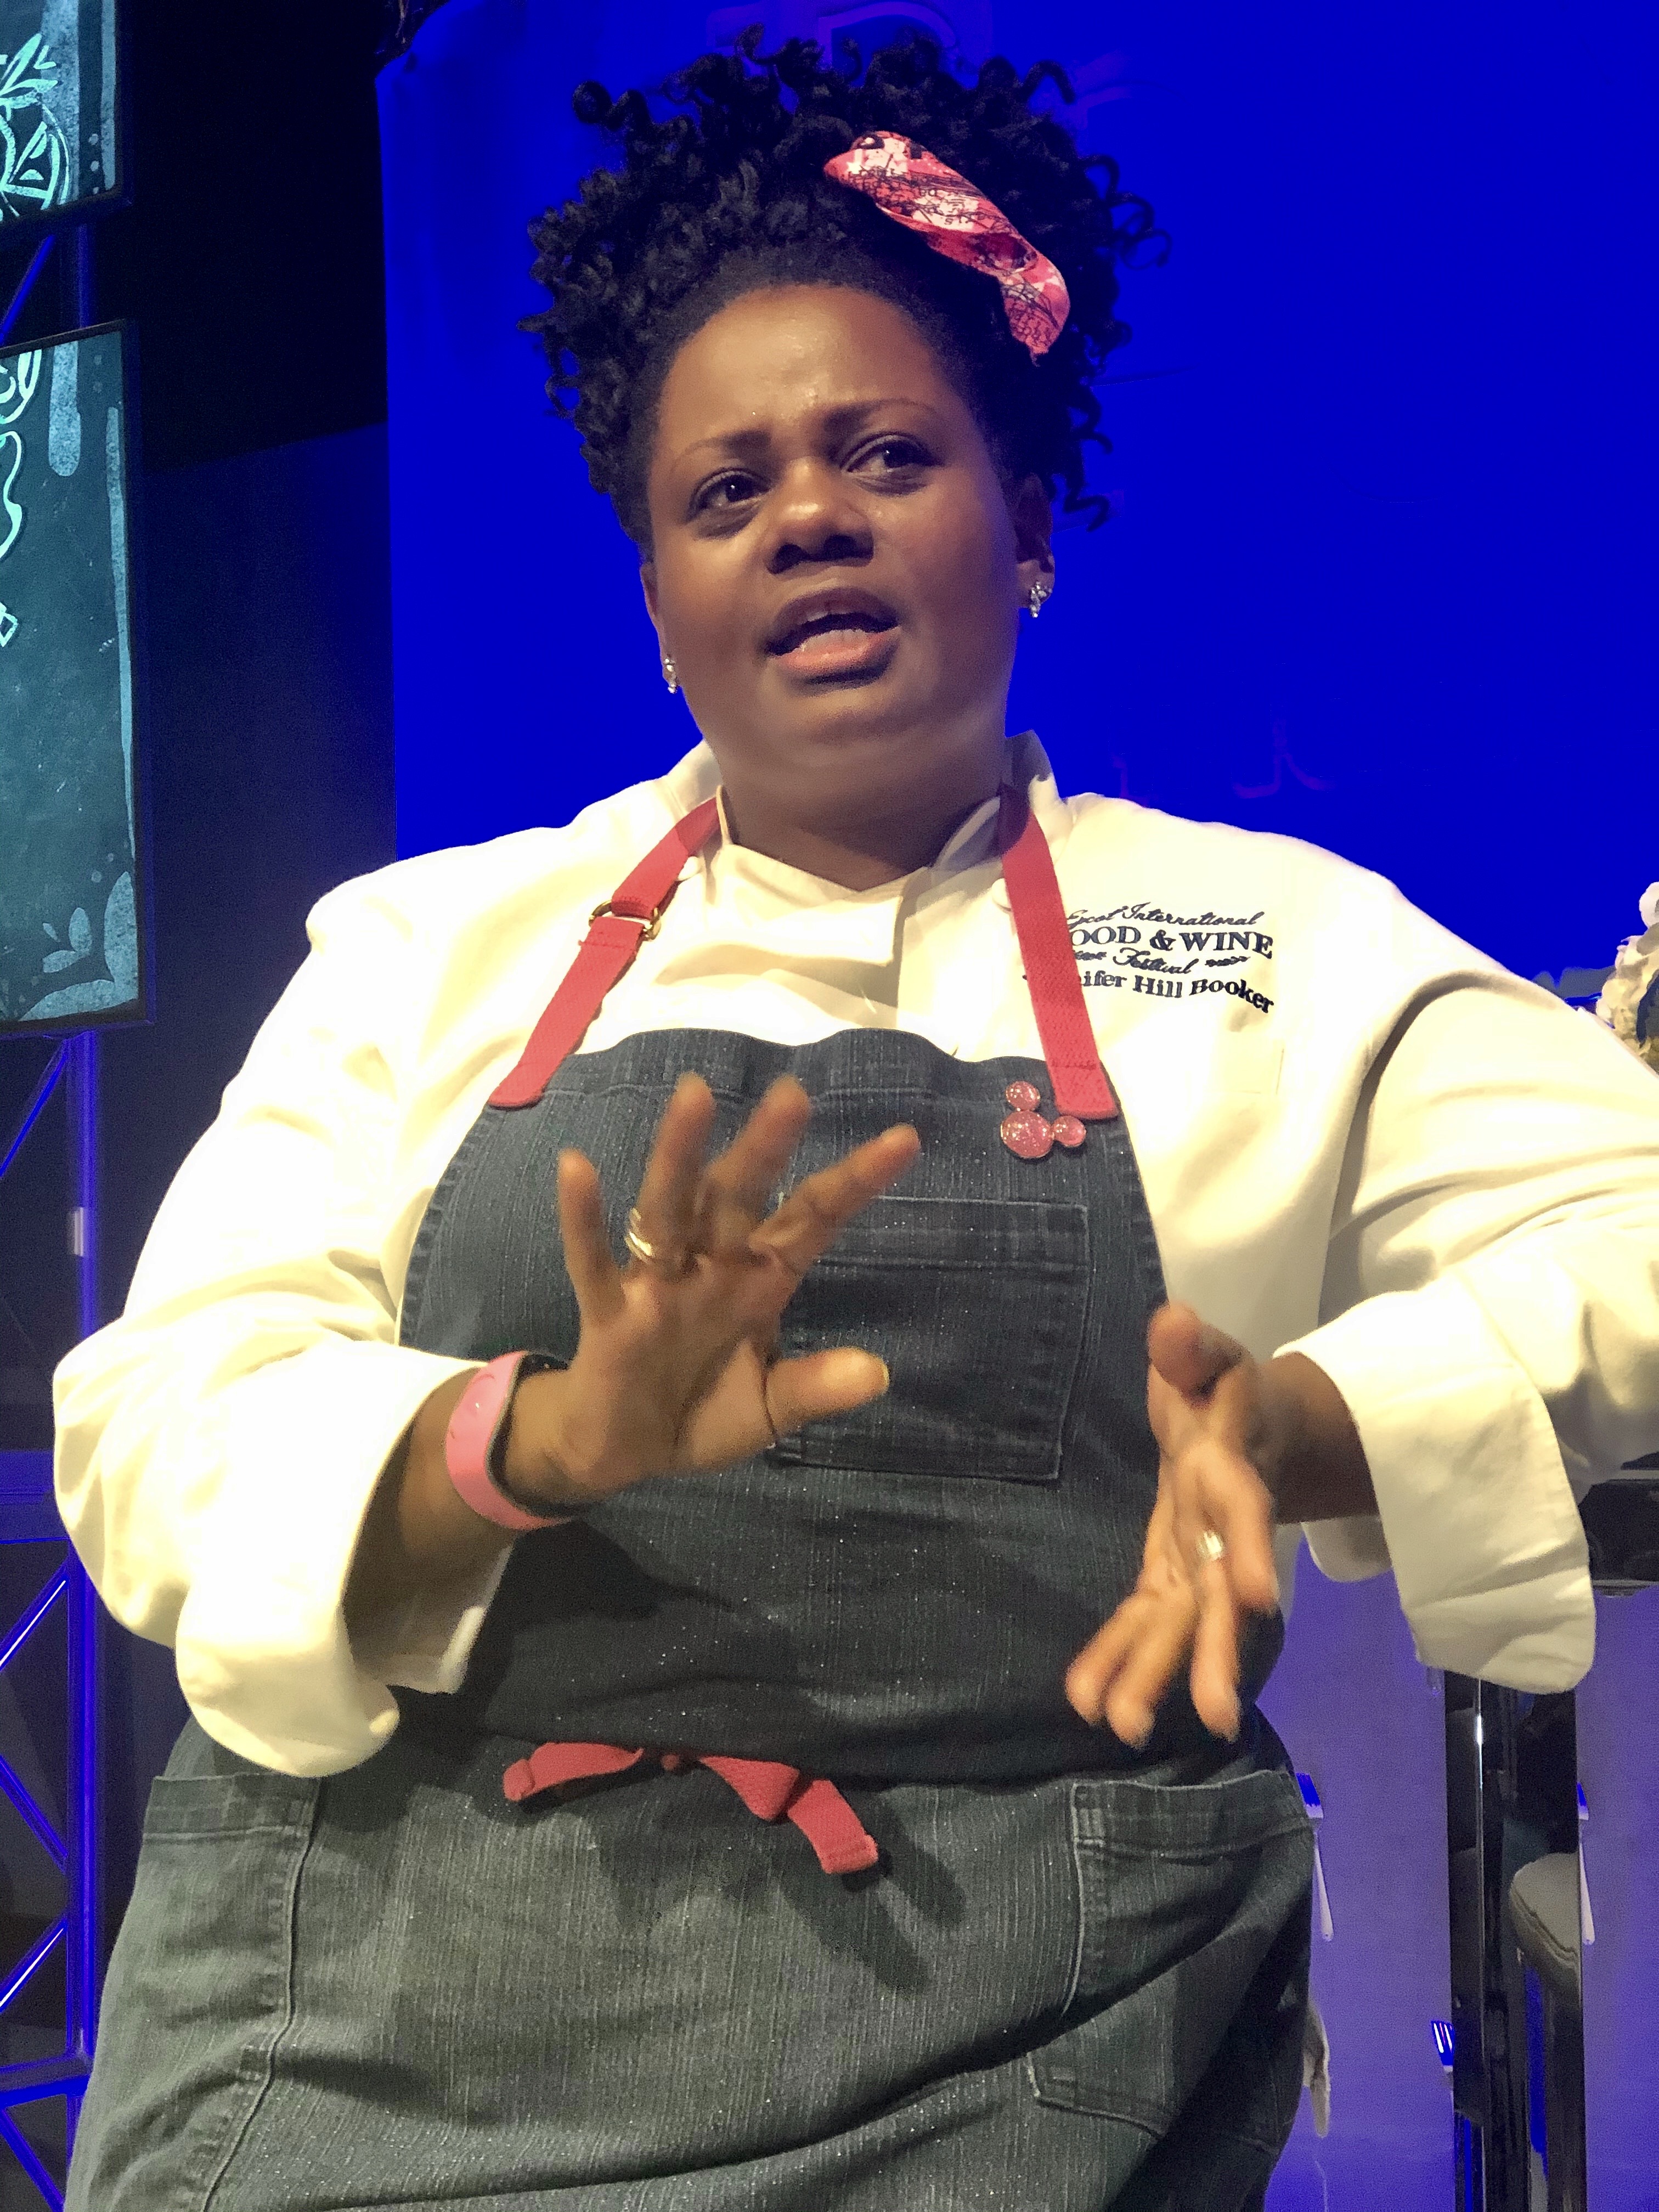 Cooking Demonstration With Celebrity Chef Jennifer Hill Booker At Epcot’s International Food & Wine Festival